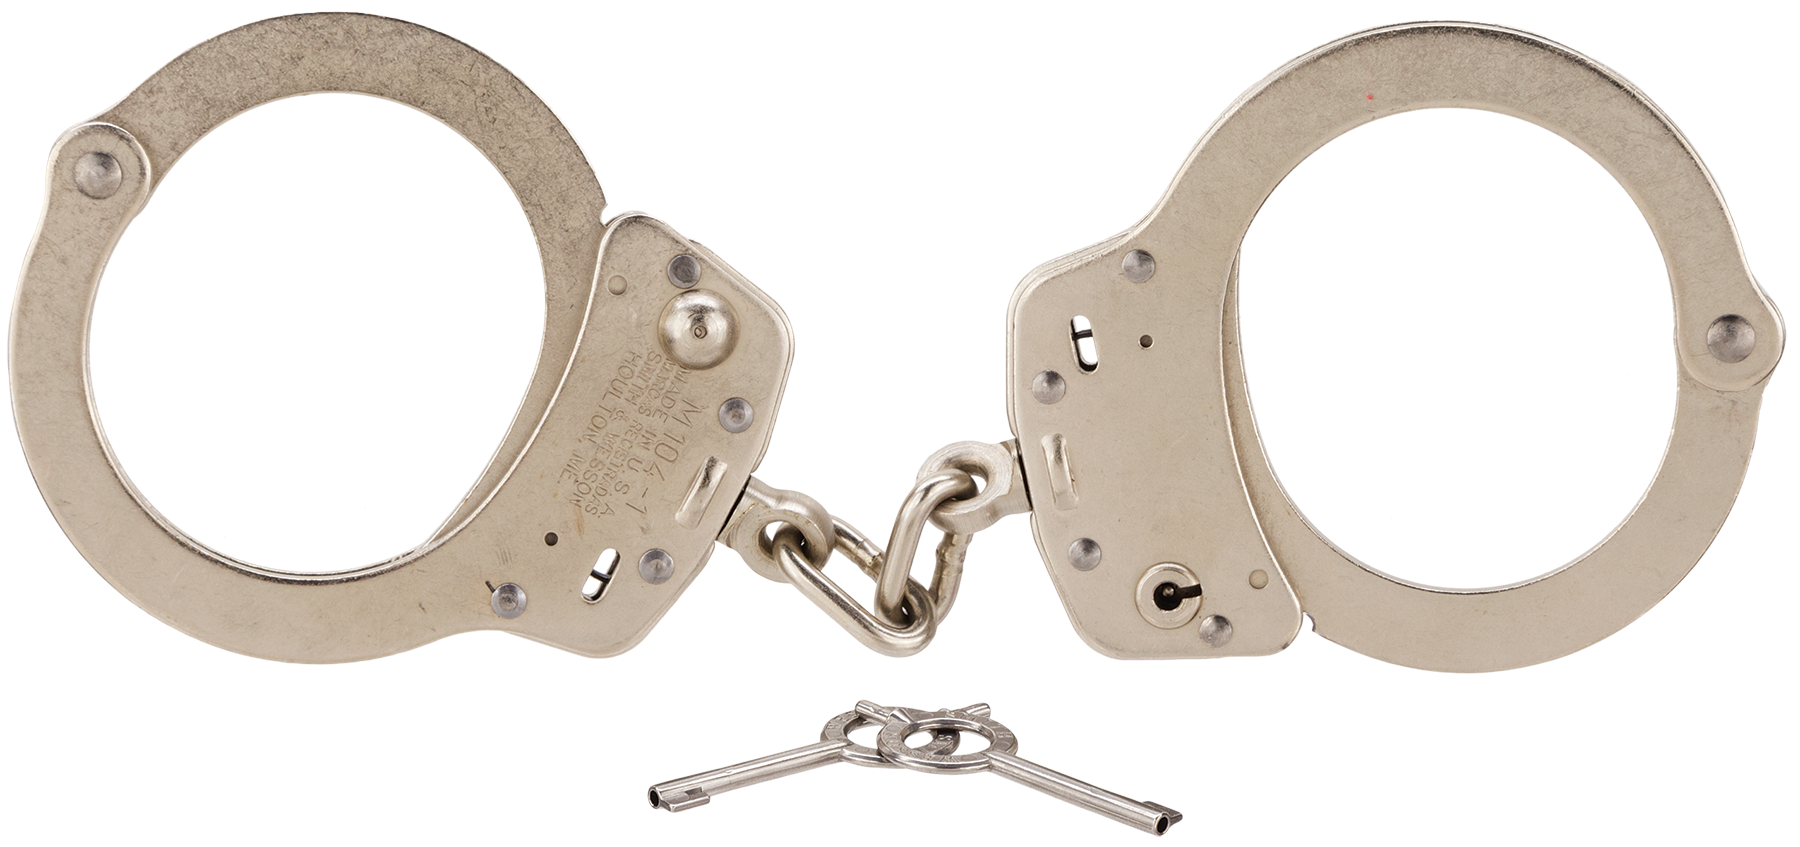 Closed handcuffs including png. Handcuff clipart handcuff key